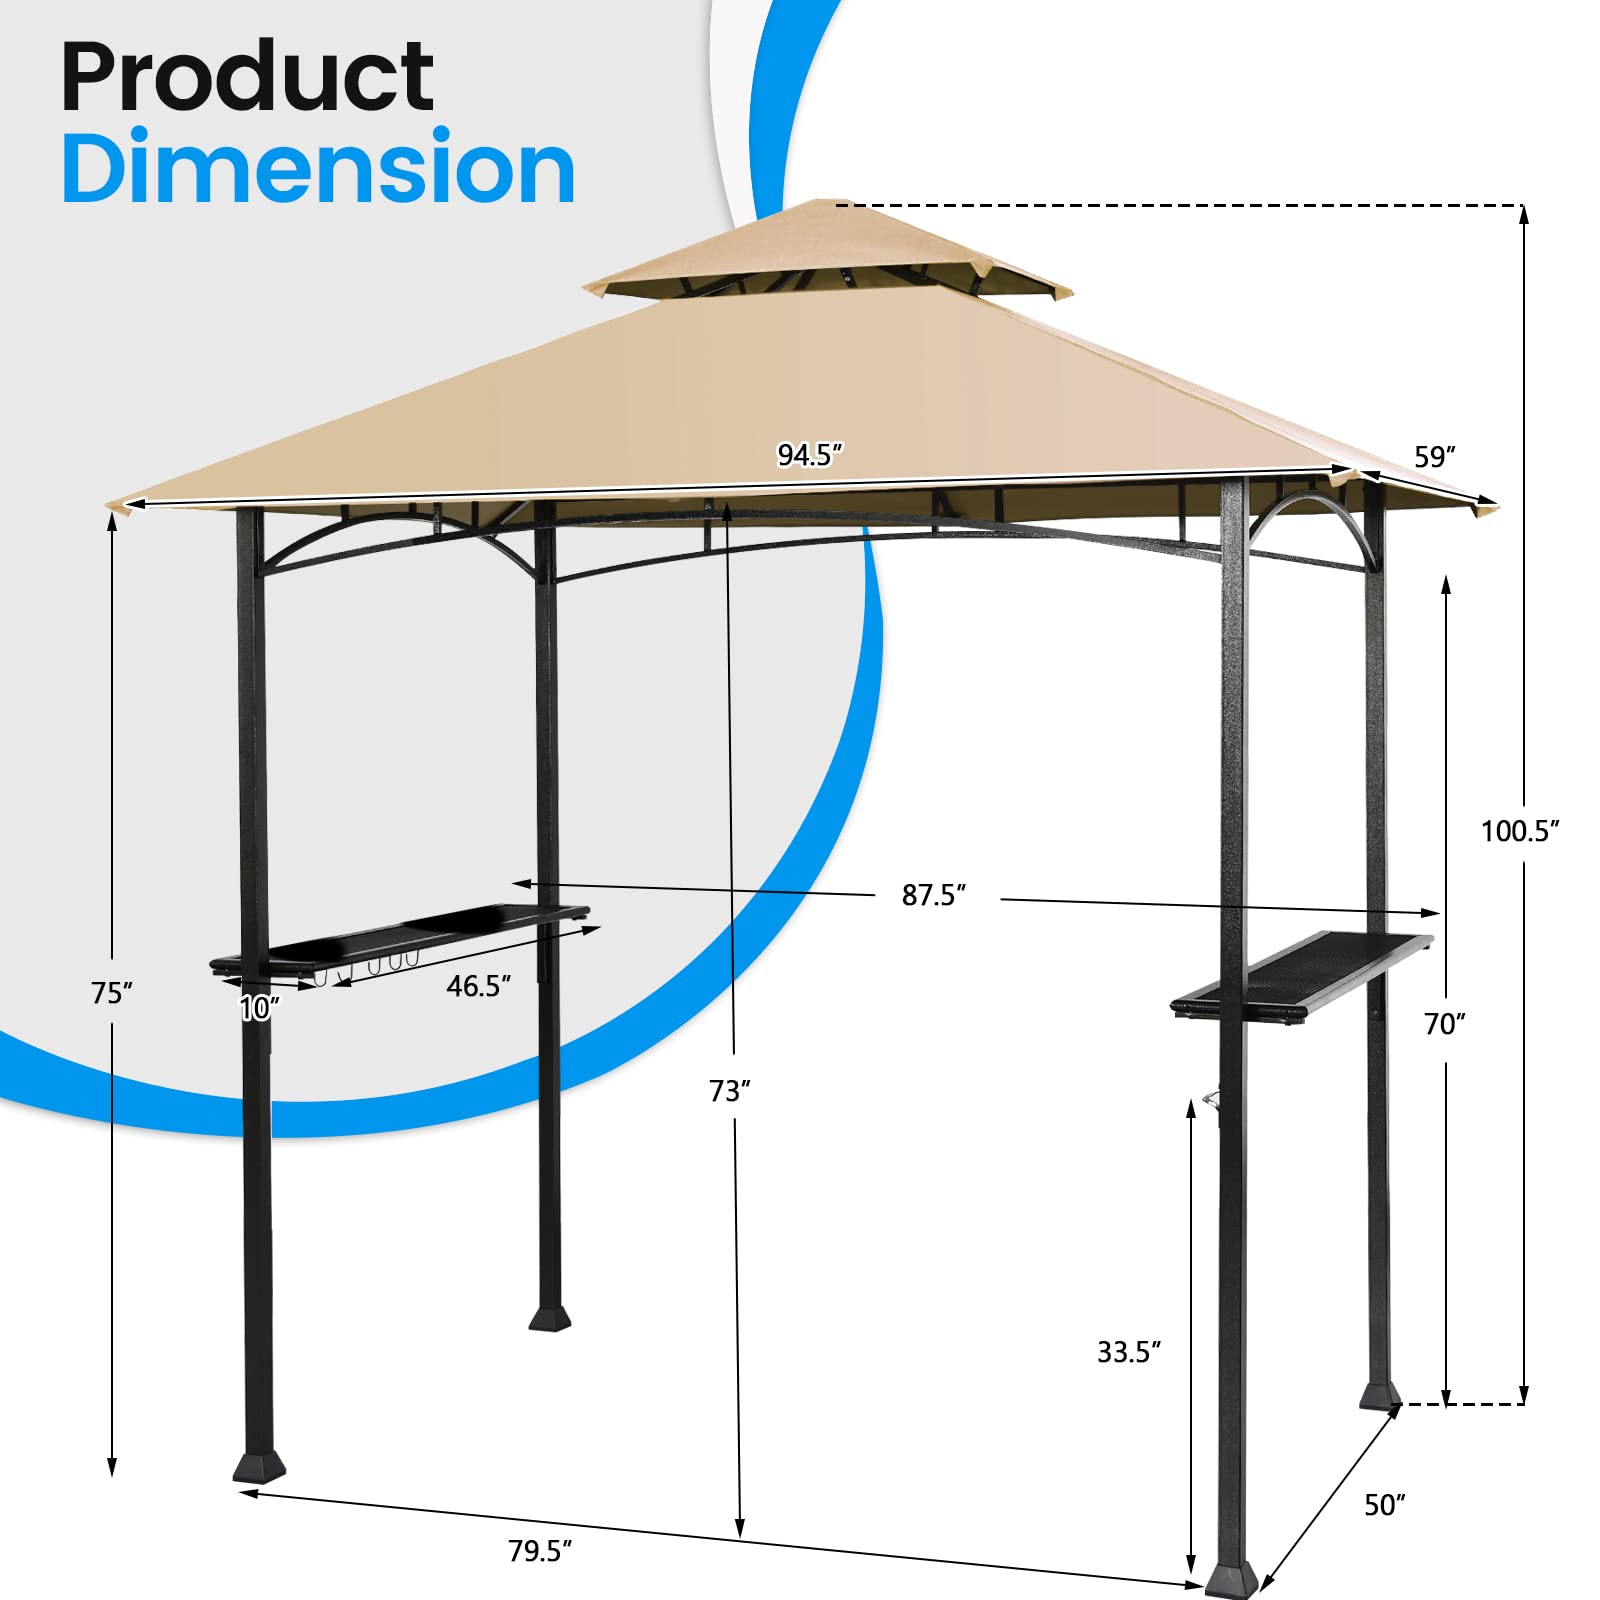 Giantex Grill Gazebo, 8ft x 5ft Grill Station with Canopy, Heavy Duty Steel Frame, 2 Side Shelves, 5 Hooks, 8 Ground Stakes, Outdoor Grill Shelter Barbecue Tent for Backyard Patio Camping (Beige)